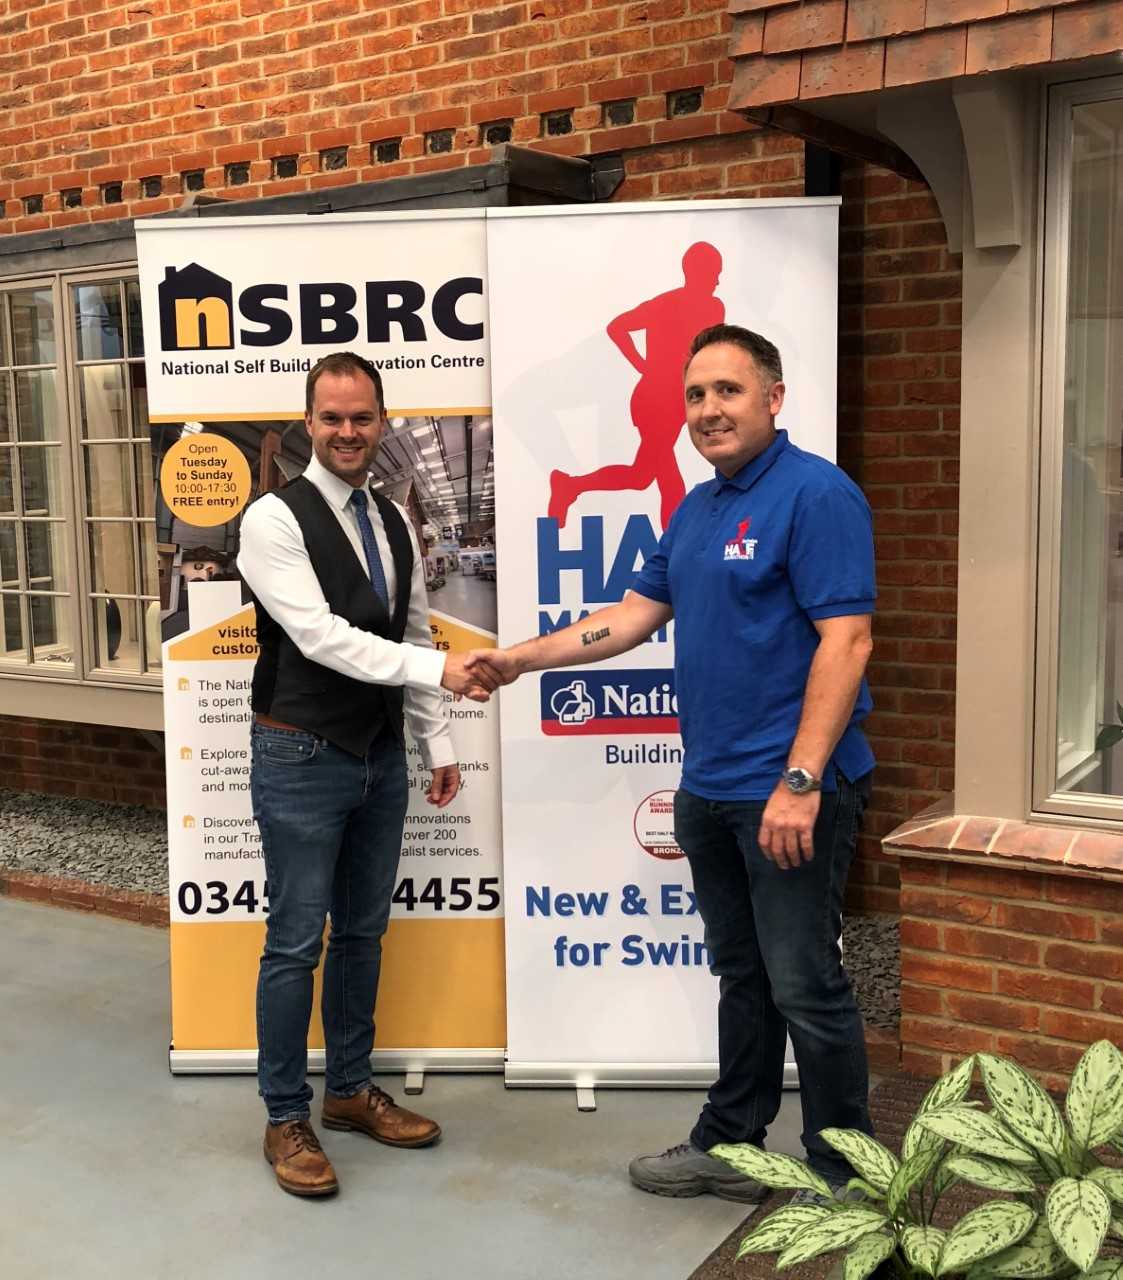 NSBRC BECOMES FIRST OFFICIAL SPONSOR OF THE 2018 NATIONWIDE NEW SWINDON HALF MARATHON